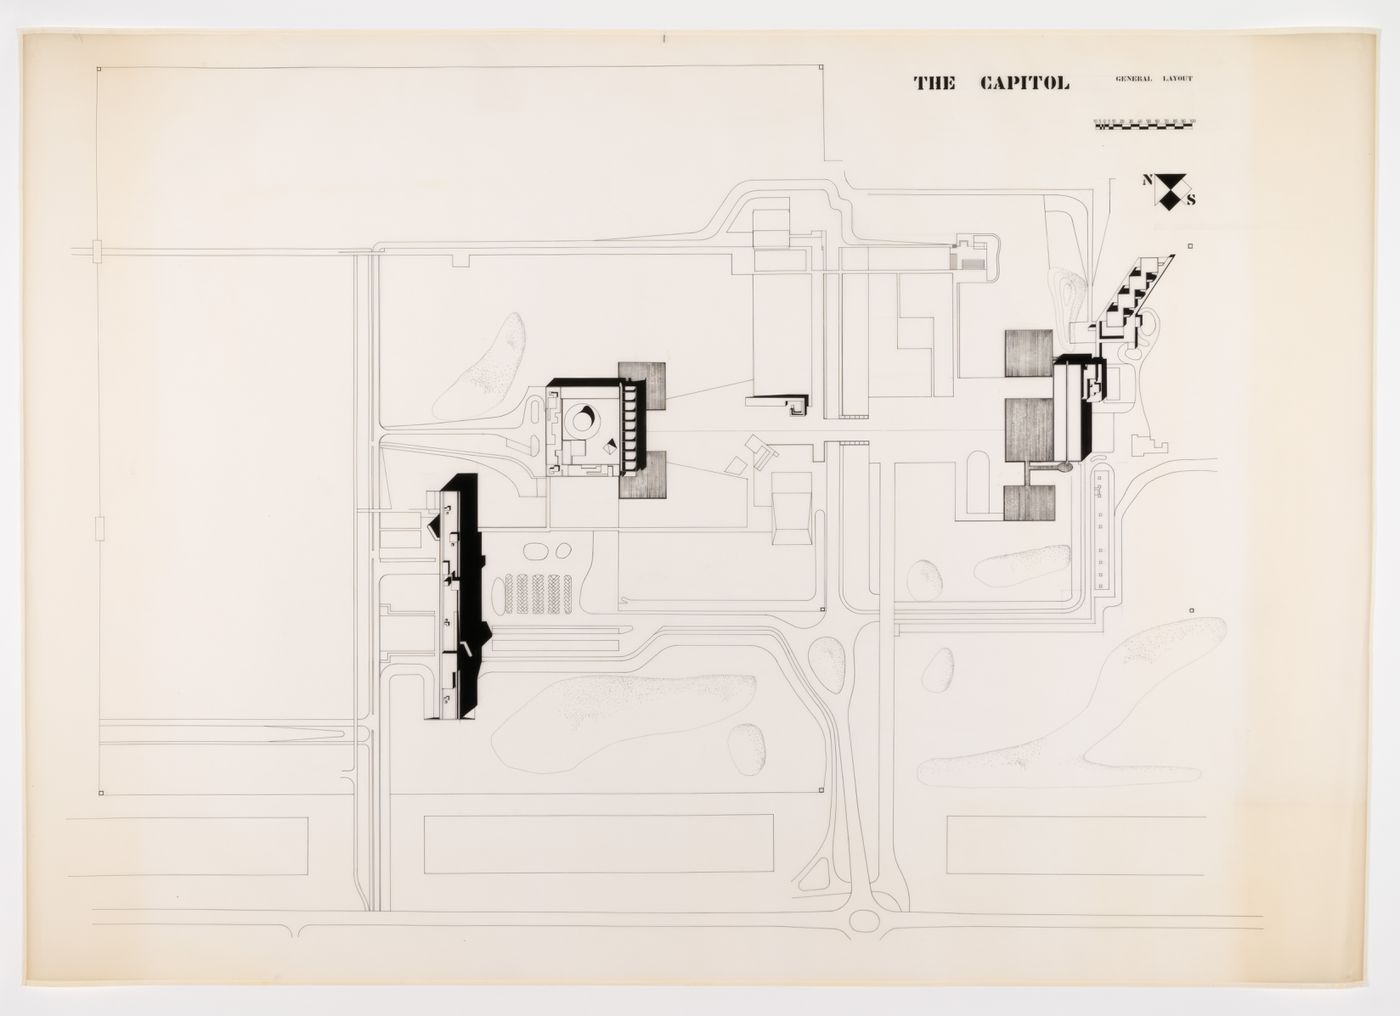 General layout for the Capitol in Chandigarh, India